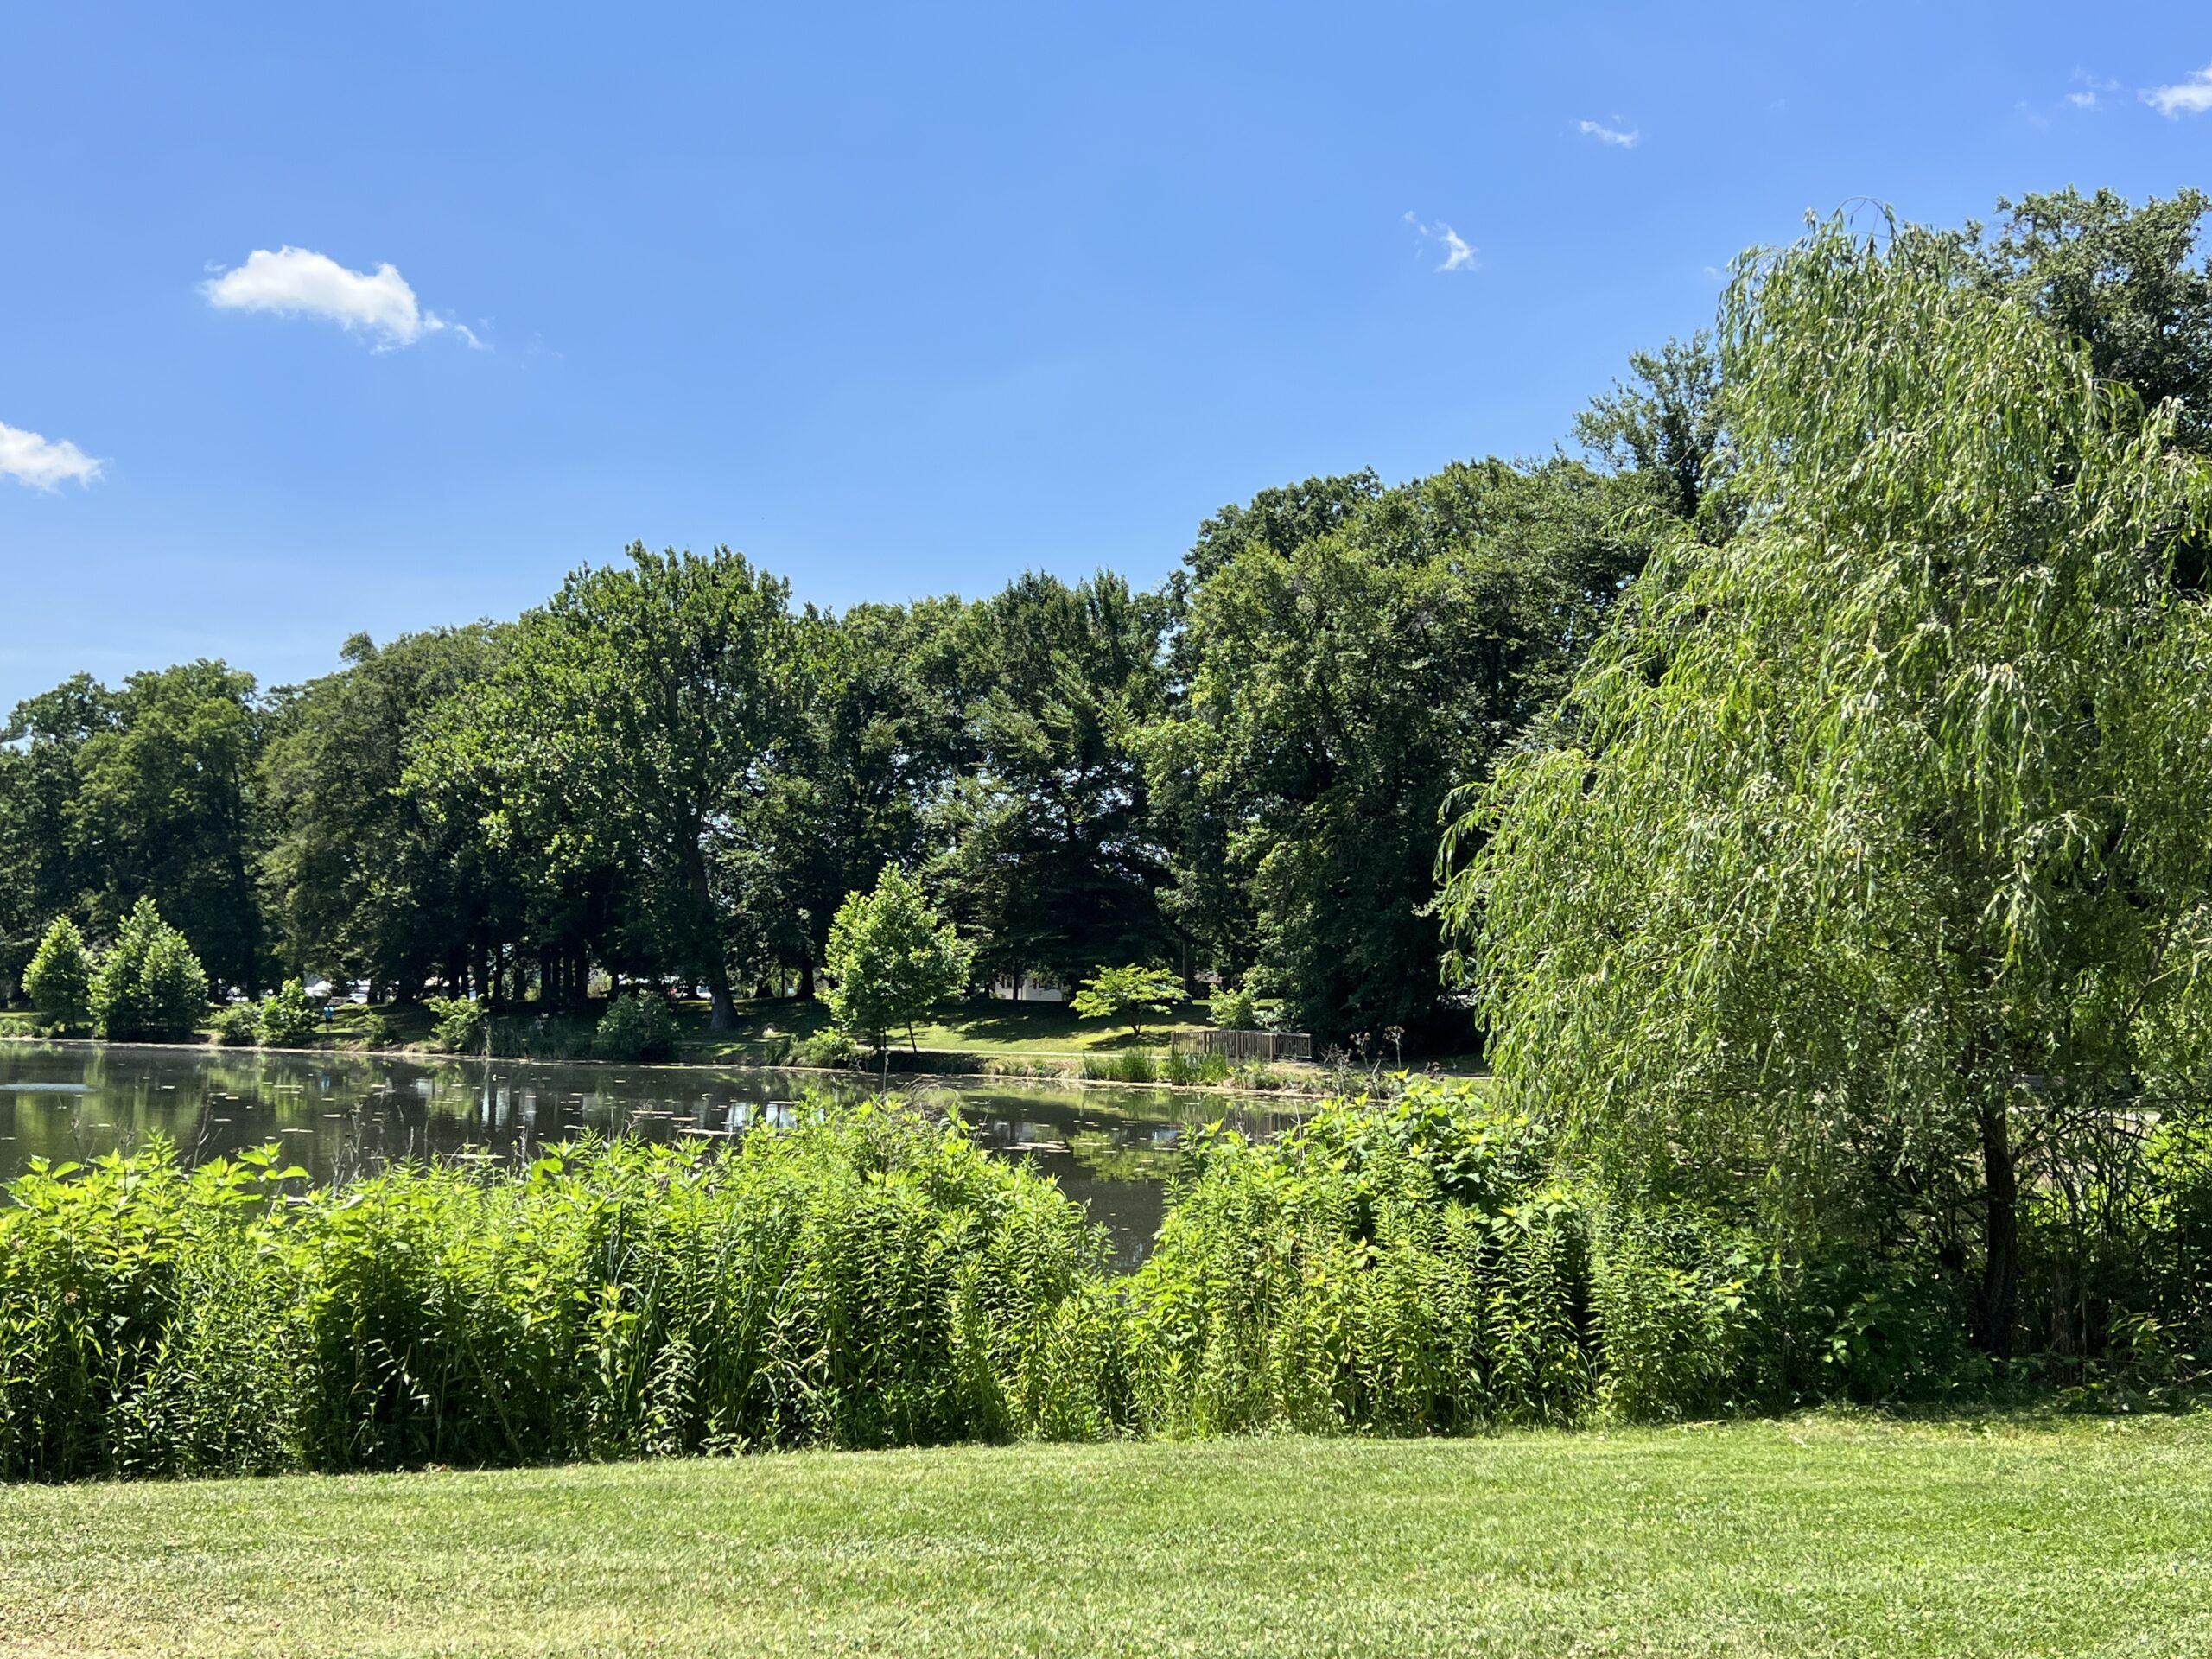 Nomahegan Park in Cranford NJ - Extras - lake view from other angle